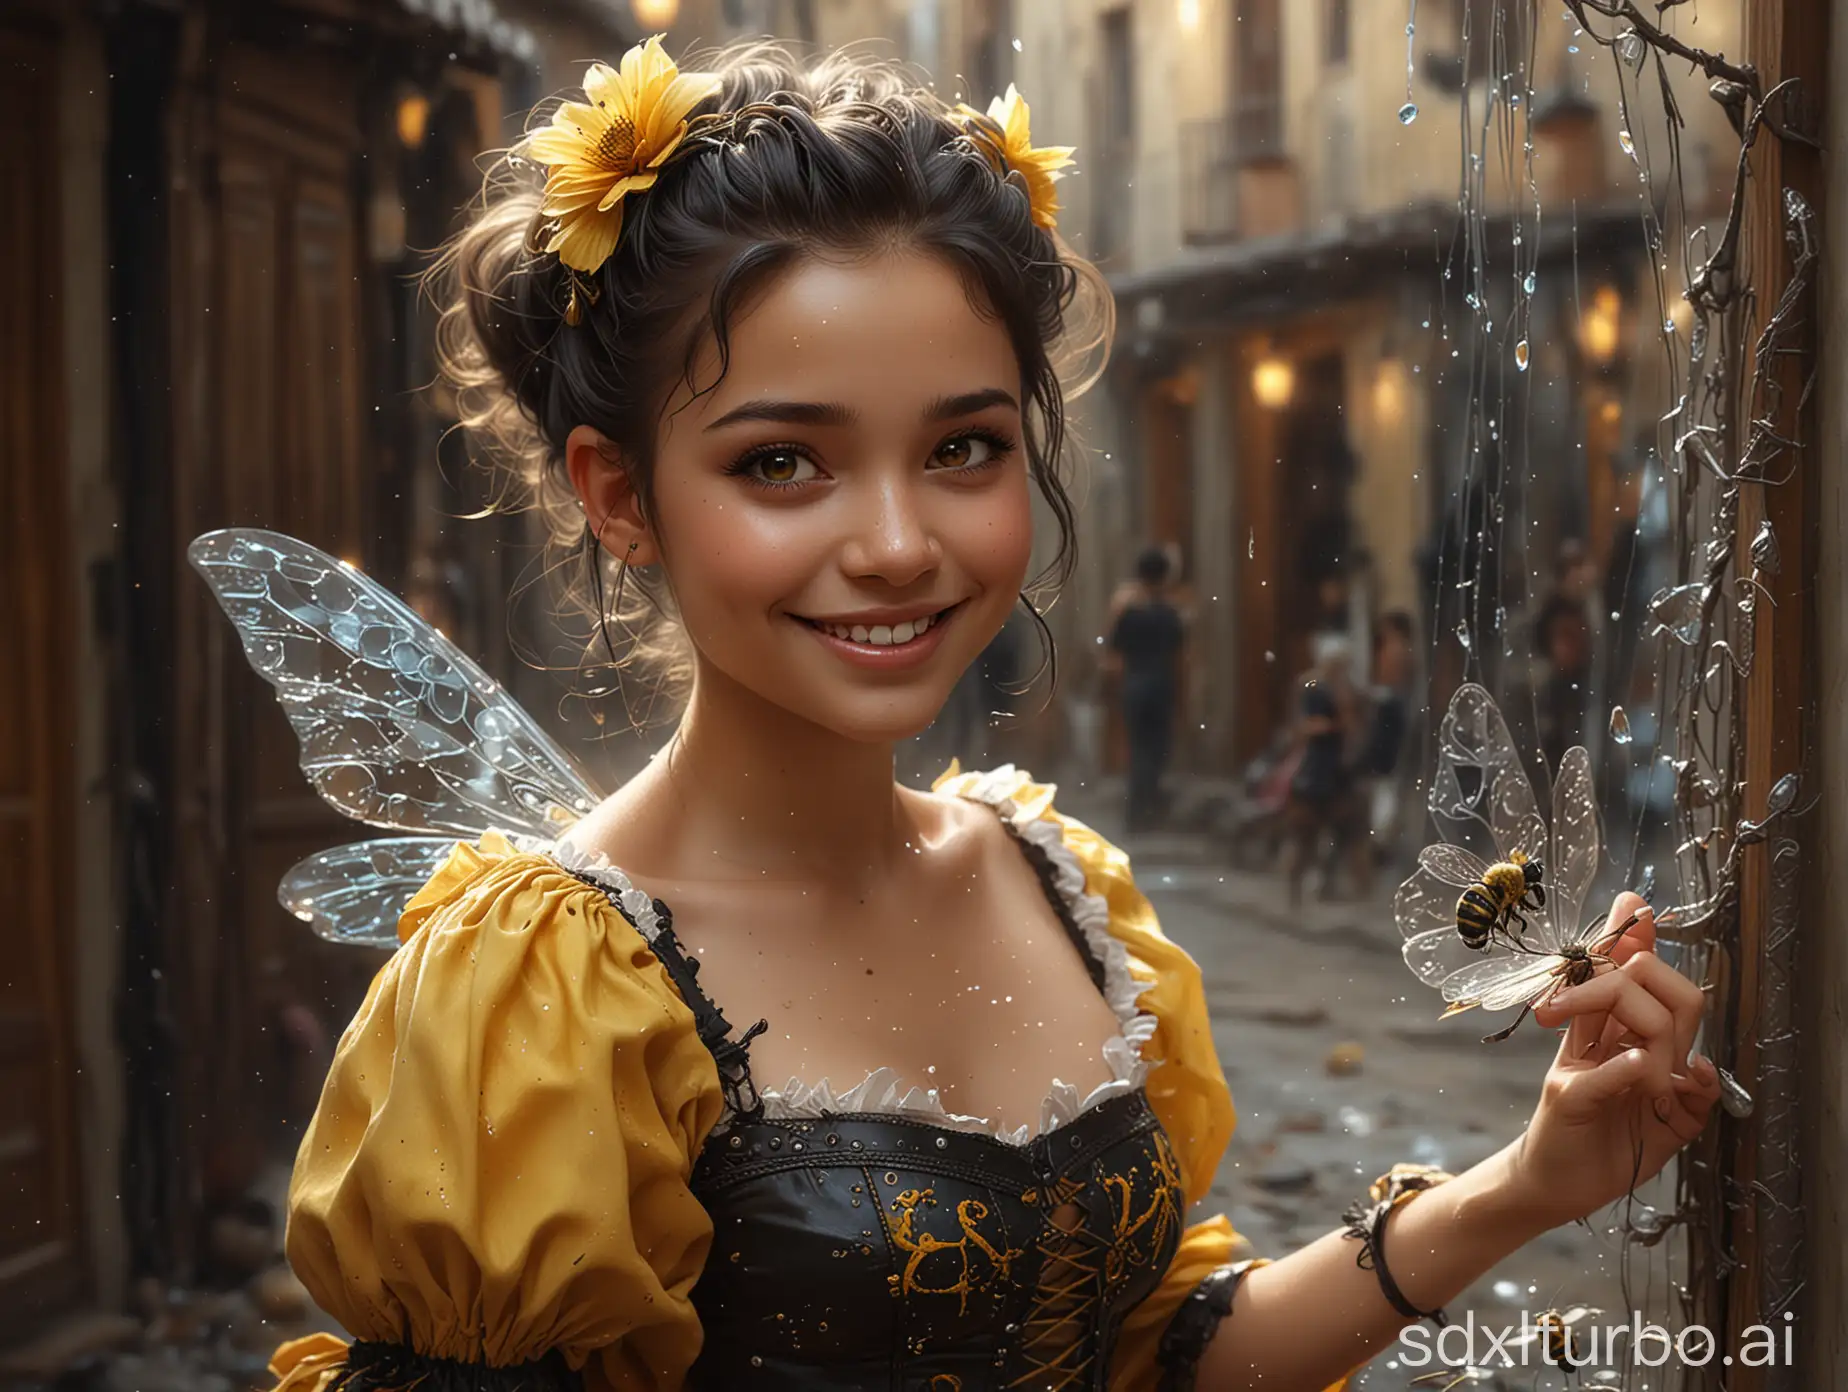 cute little women 20 yaers old in honey bee carnival dress, tanned skin, happy smile,full body, luis royo house an ultra hd detailed painting, digital art,shaggy upswept black-yellow hair, realistic, Art by Daniela Uhlig and Tatiana Suarez, a tattooed punk beauty, bright, smile, cute little baby girl honey bee dress beautiful, splash, Glittering, cute and adorable, filigree, rim lighting, lights, extremely, magic, surreal, fantasy, digital art, wlop, Broken Glass effect, stunning